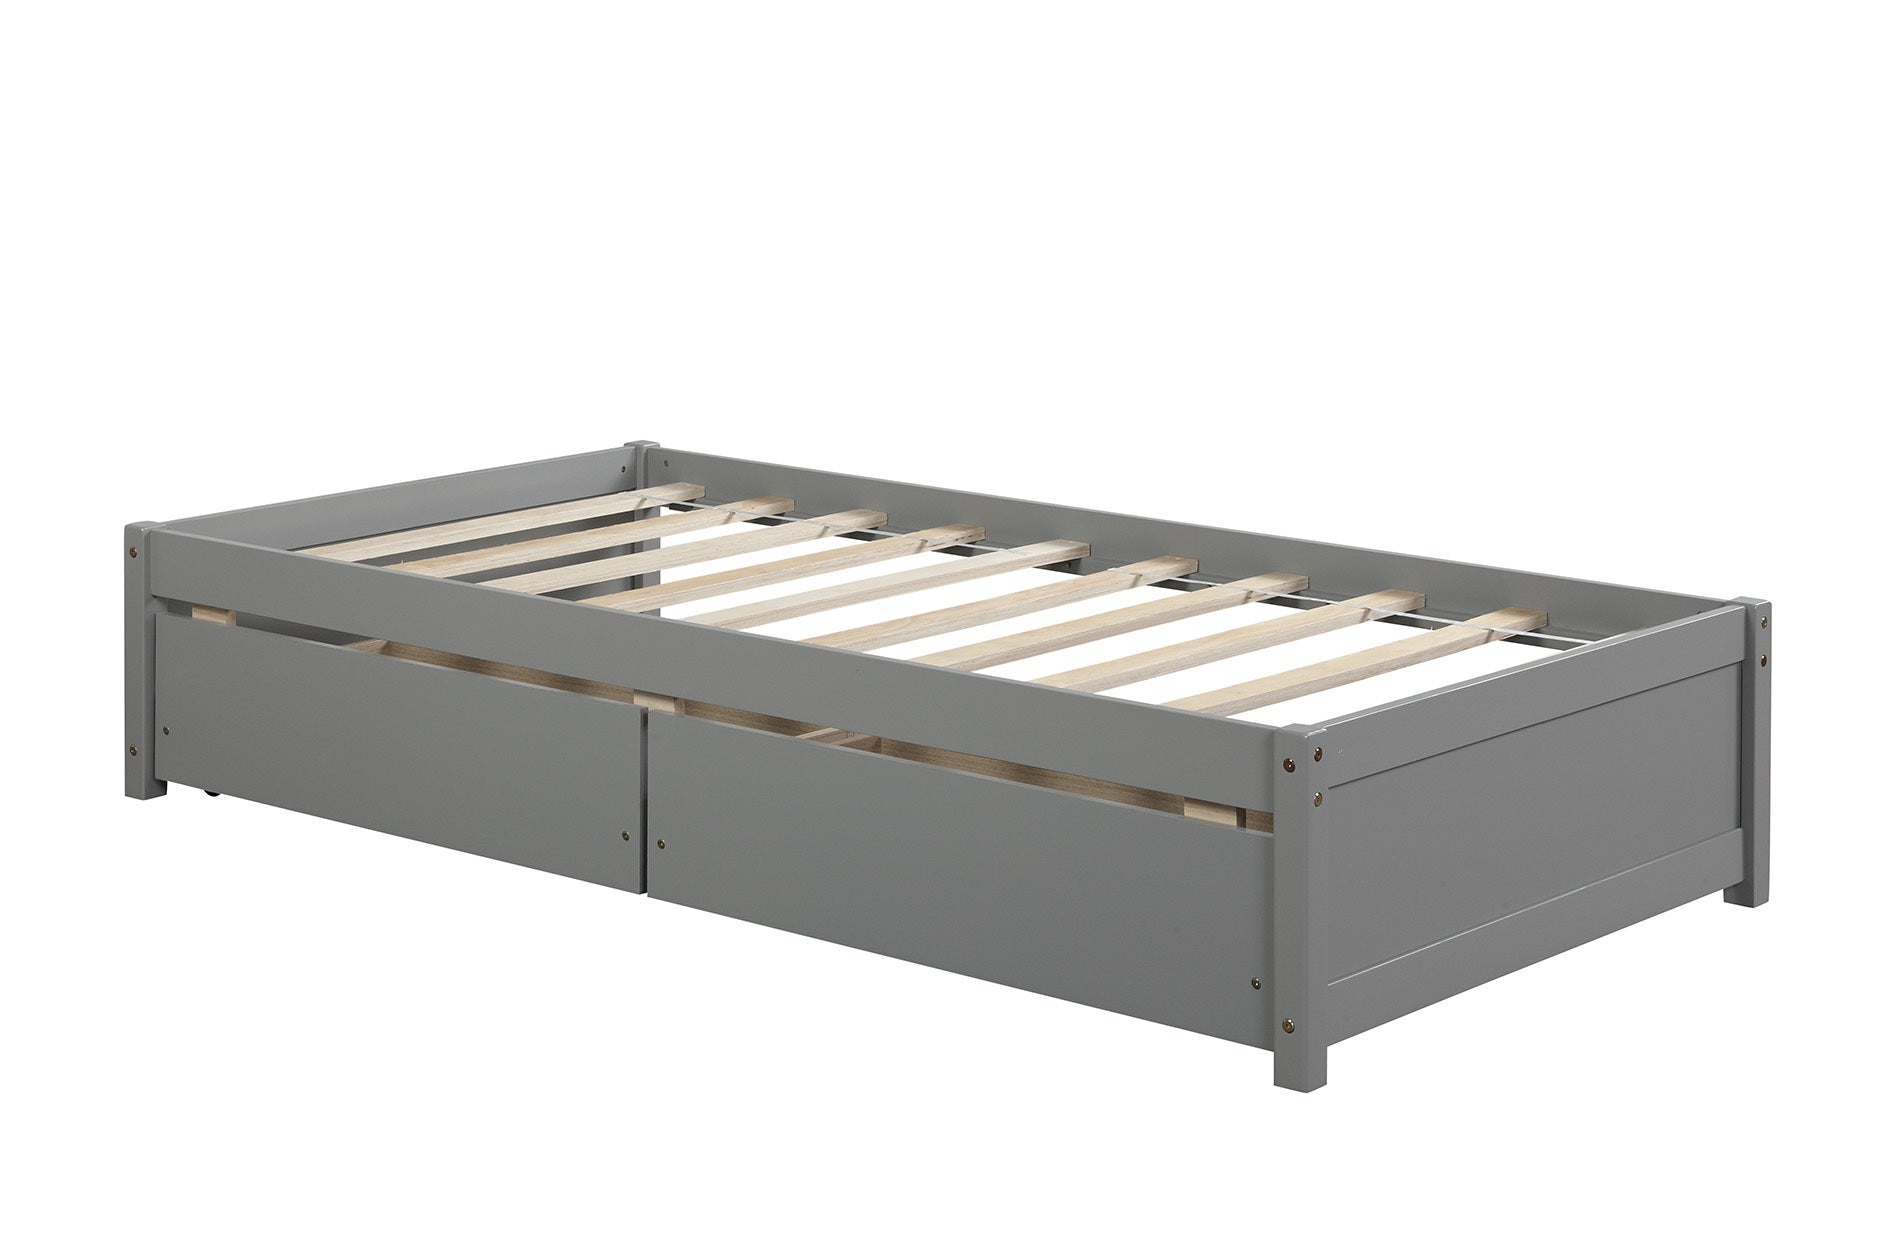 Twin Solid Wood Bed Frame with Storage Drawers By: Alabama Beds